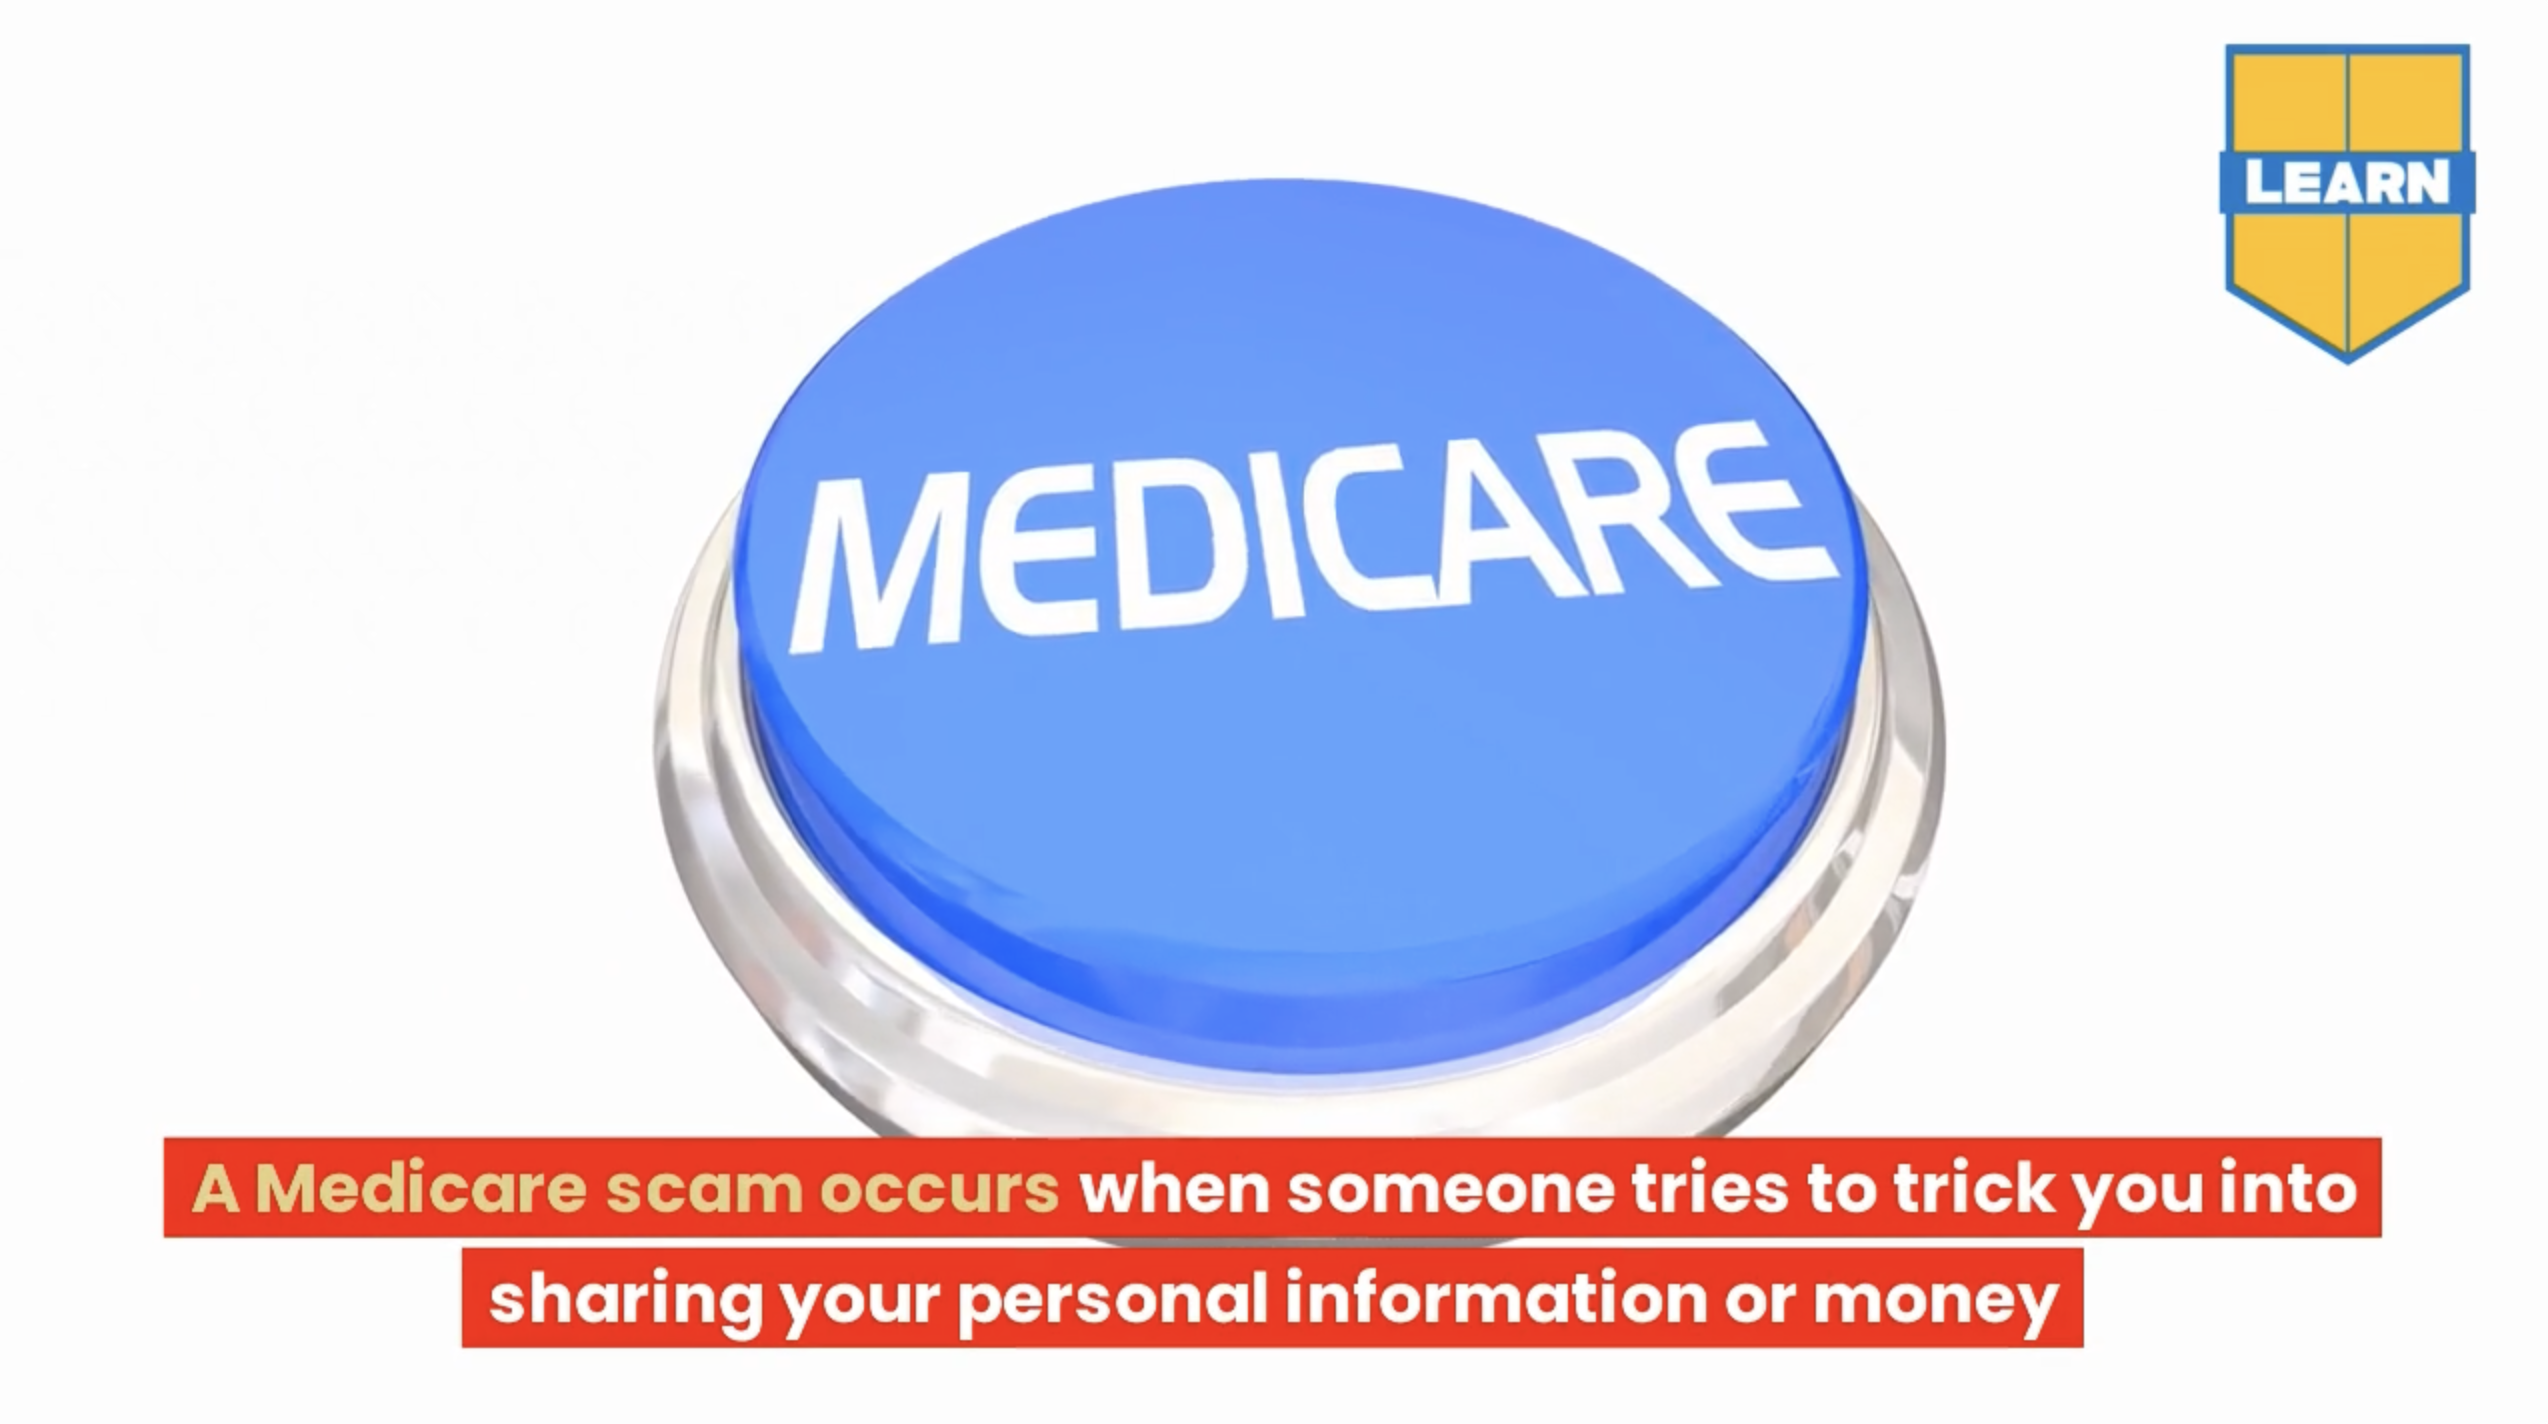 What is a Medicare Scam?